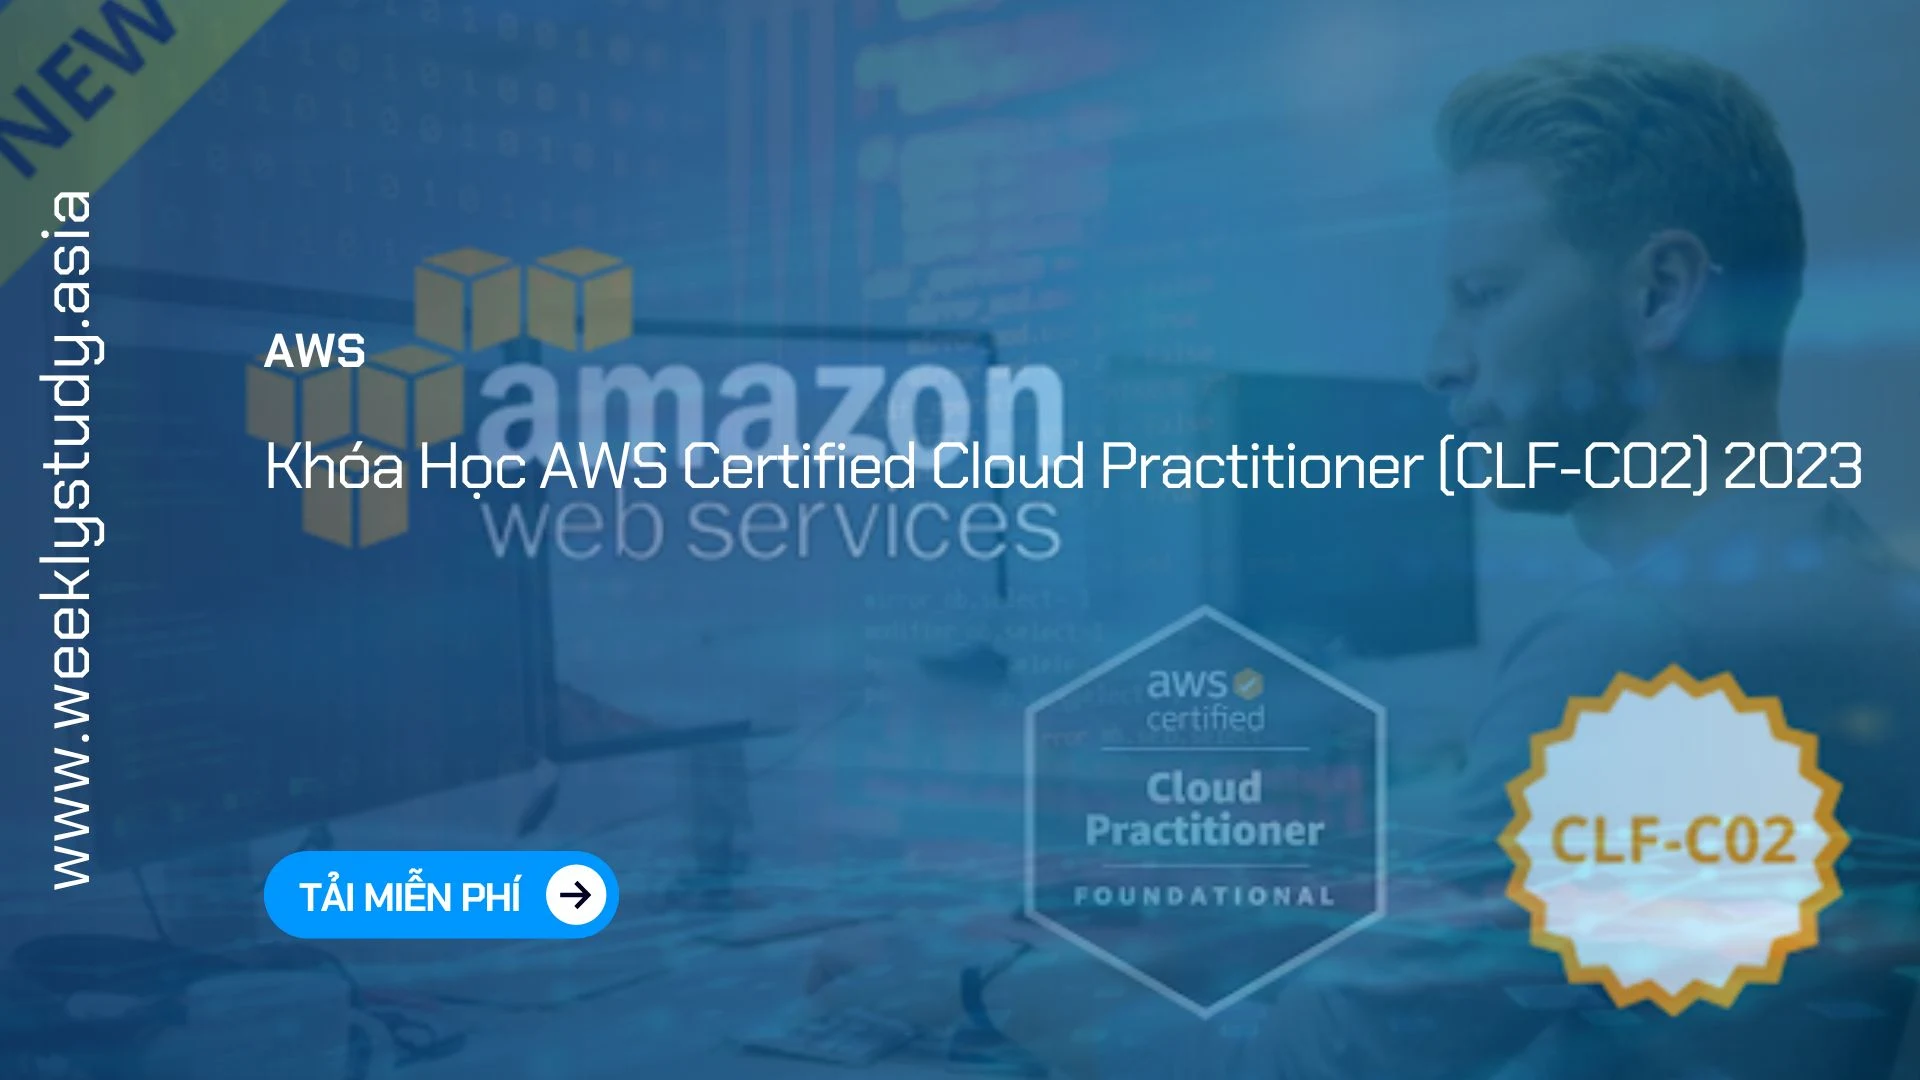 weekly-study-khoa-hoc-aws-certified-cloud-practitioner-clf-c02-2023-ma-6914a